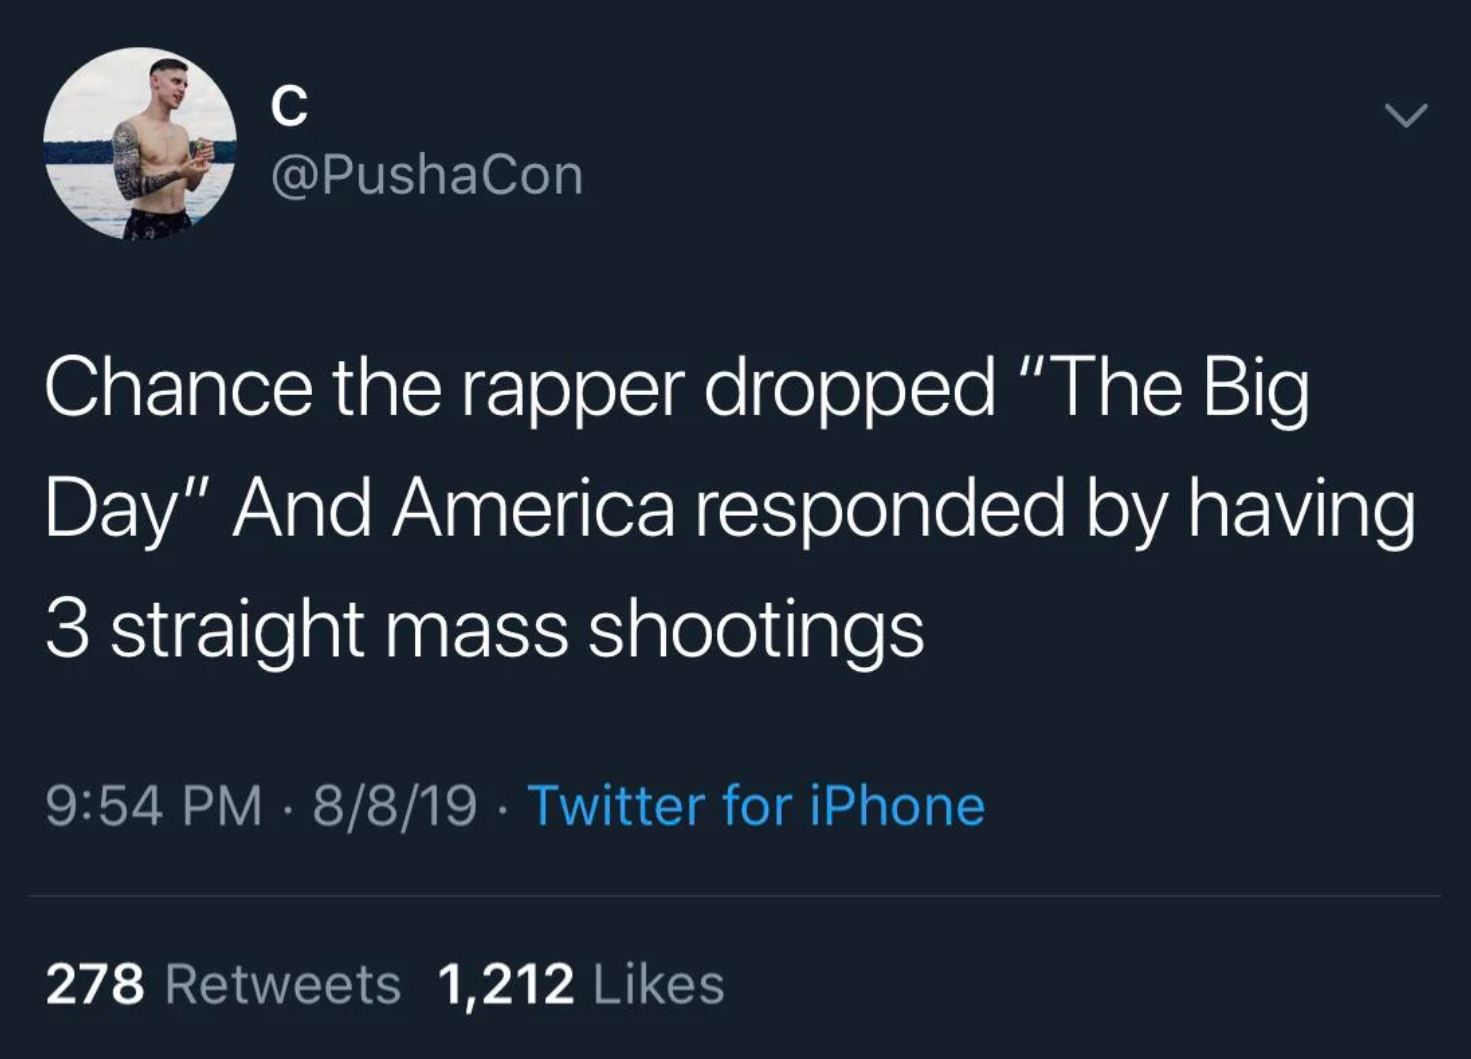 C
@PushaCon
Chance the rapper dropped "The Big
Day" And America responded by having
3 straight mass shootings
9:54 PM - 8/8/19 Twitter for iPhone
278 Retweets 1,212 Likes